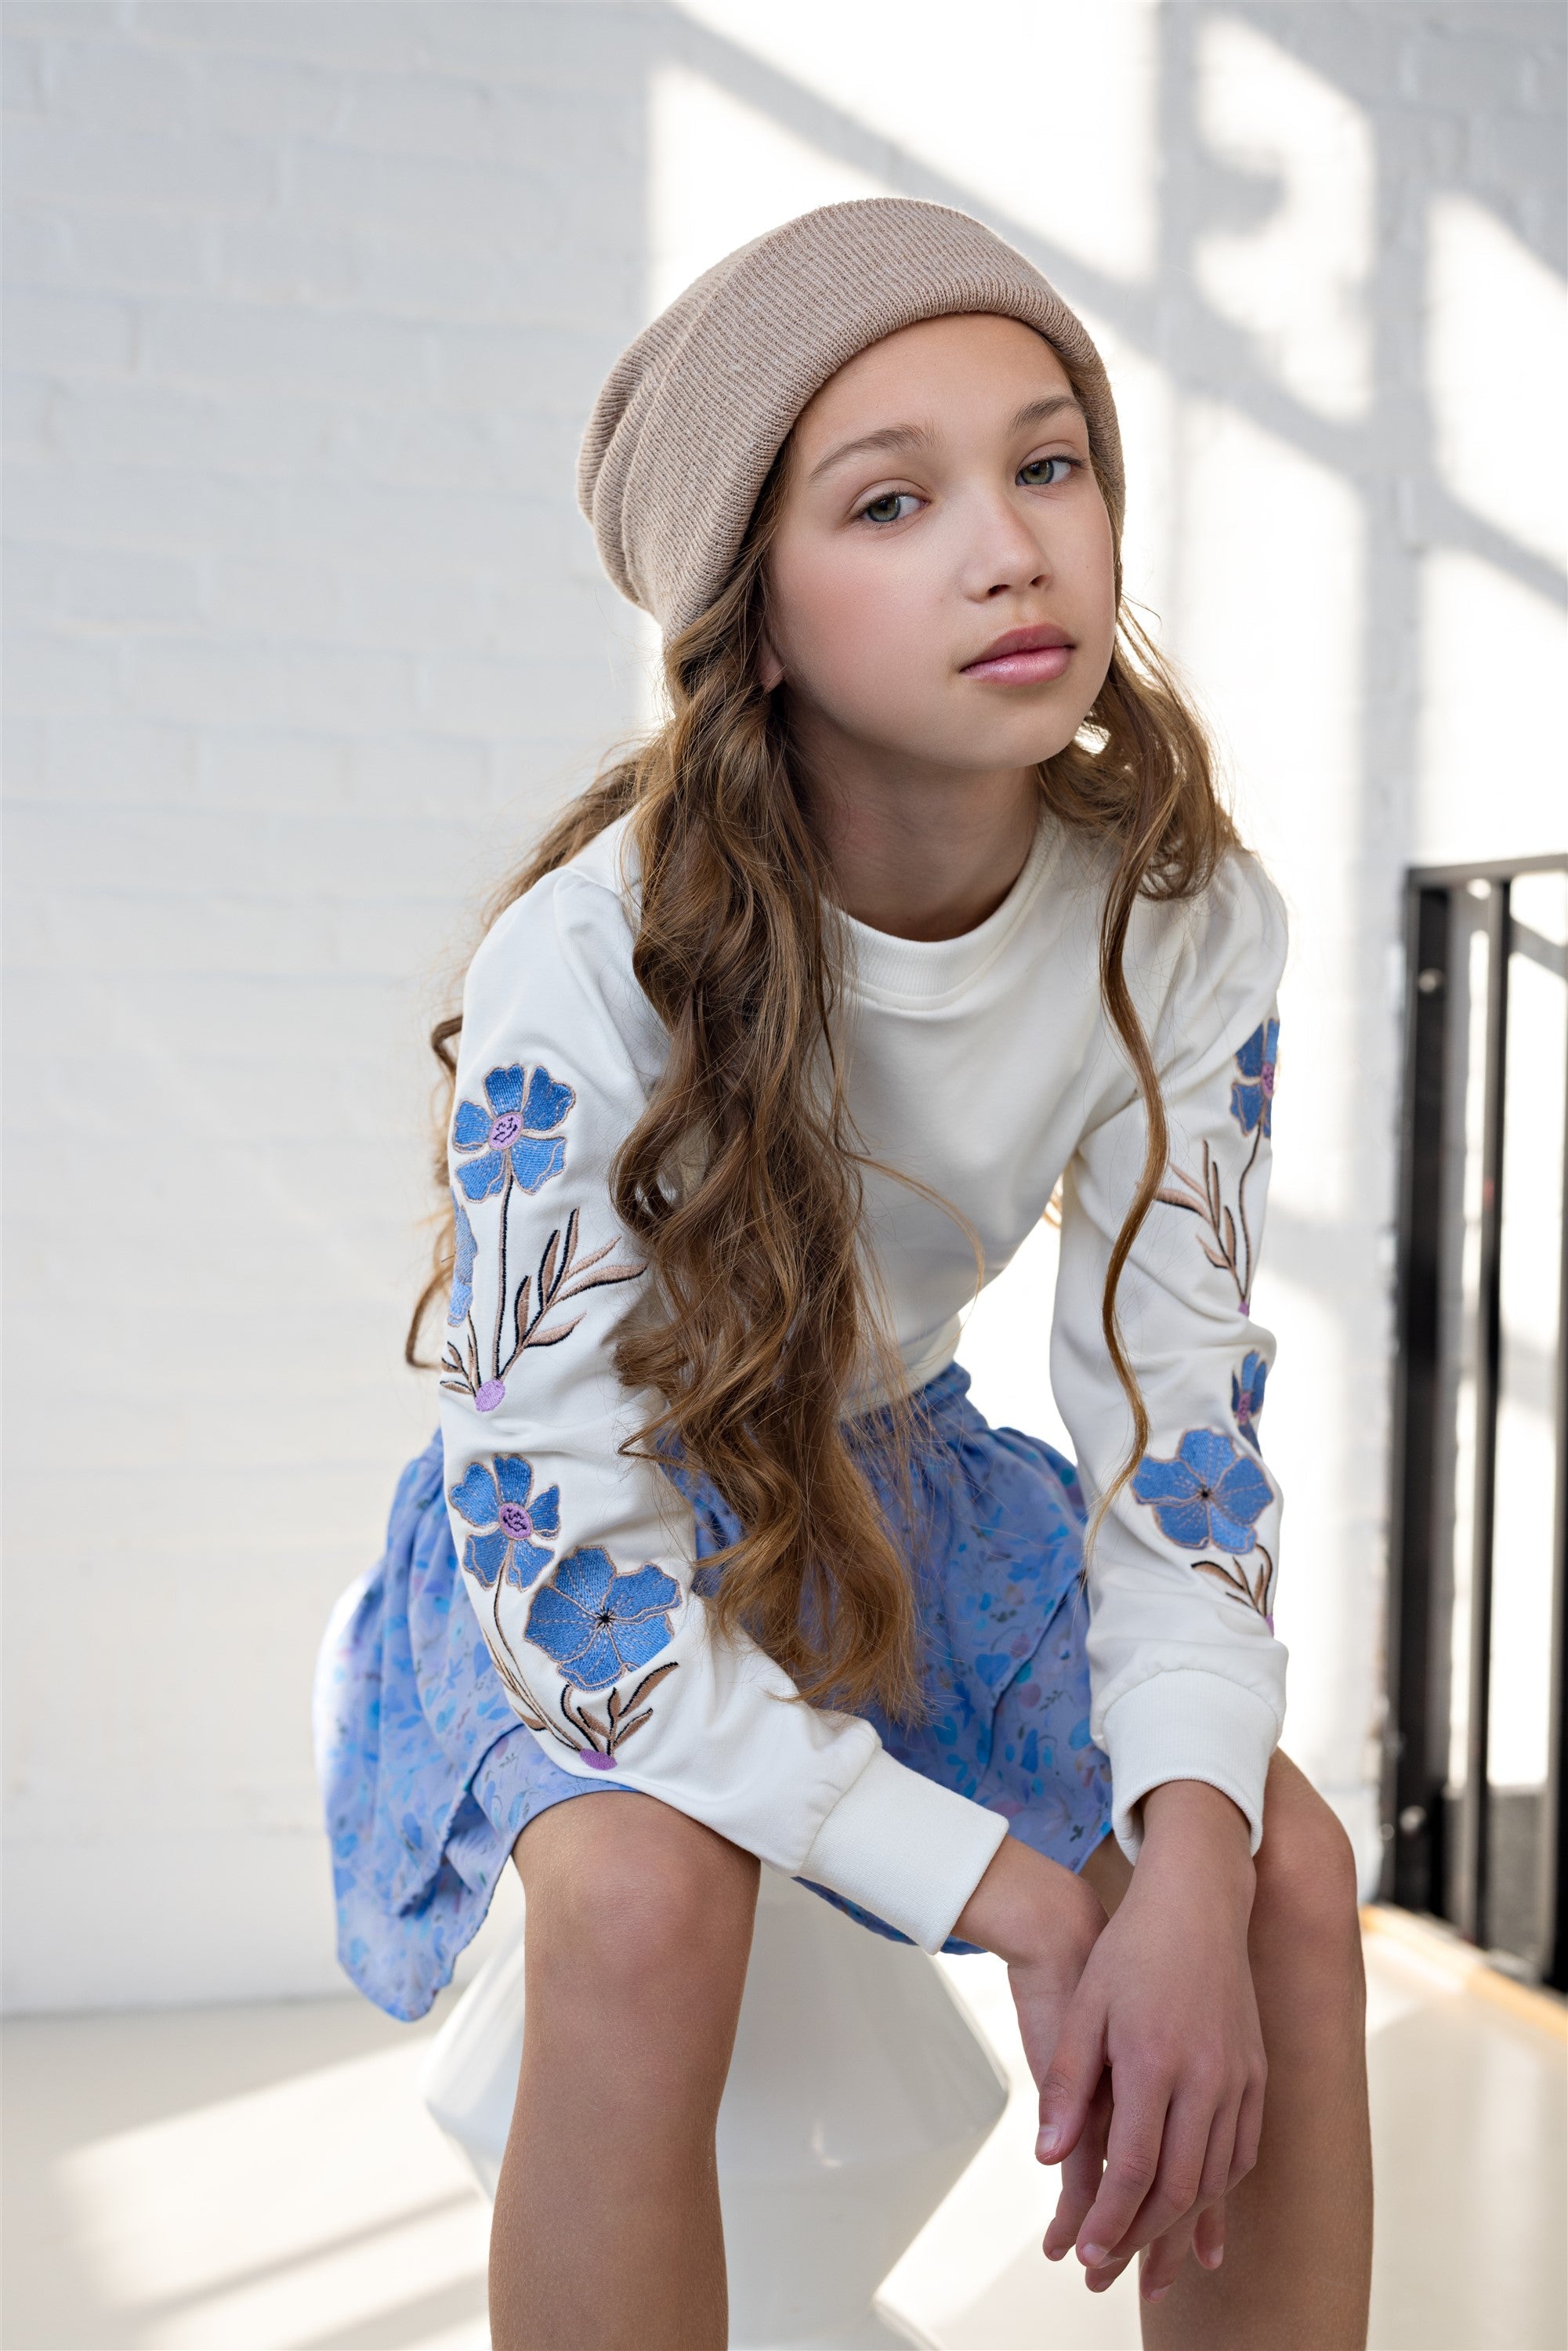 Meisjes Kate Girls Sweater Crew Neck With Embroidered Sleeves White van NoNo in de kleur Snow White in maat 134-140.